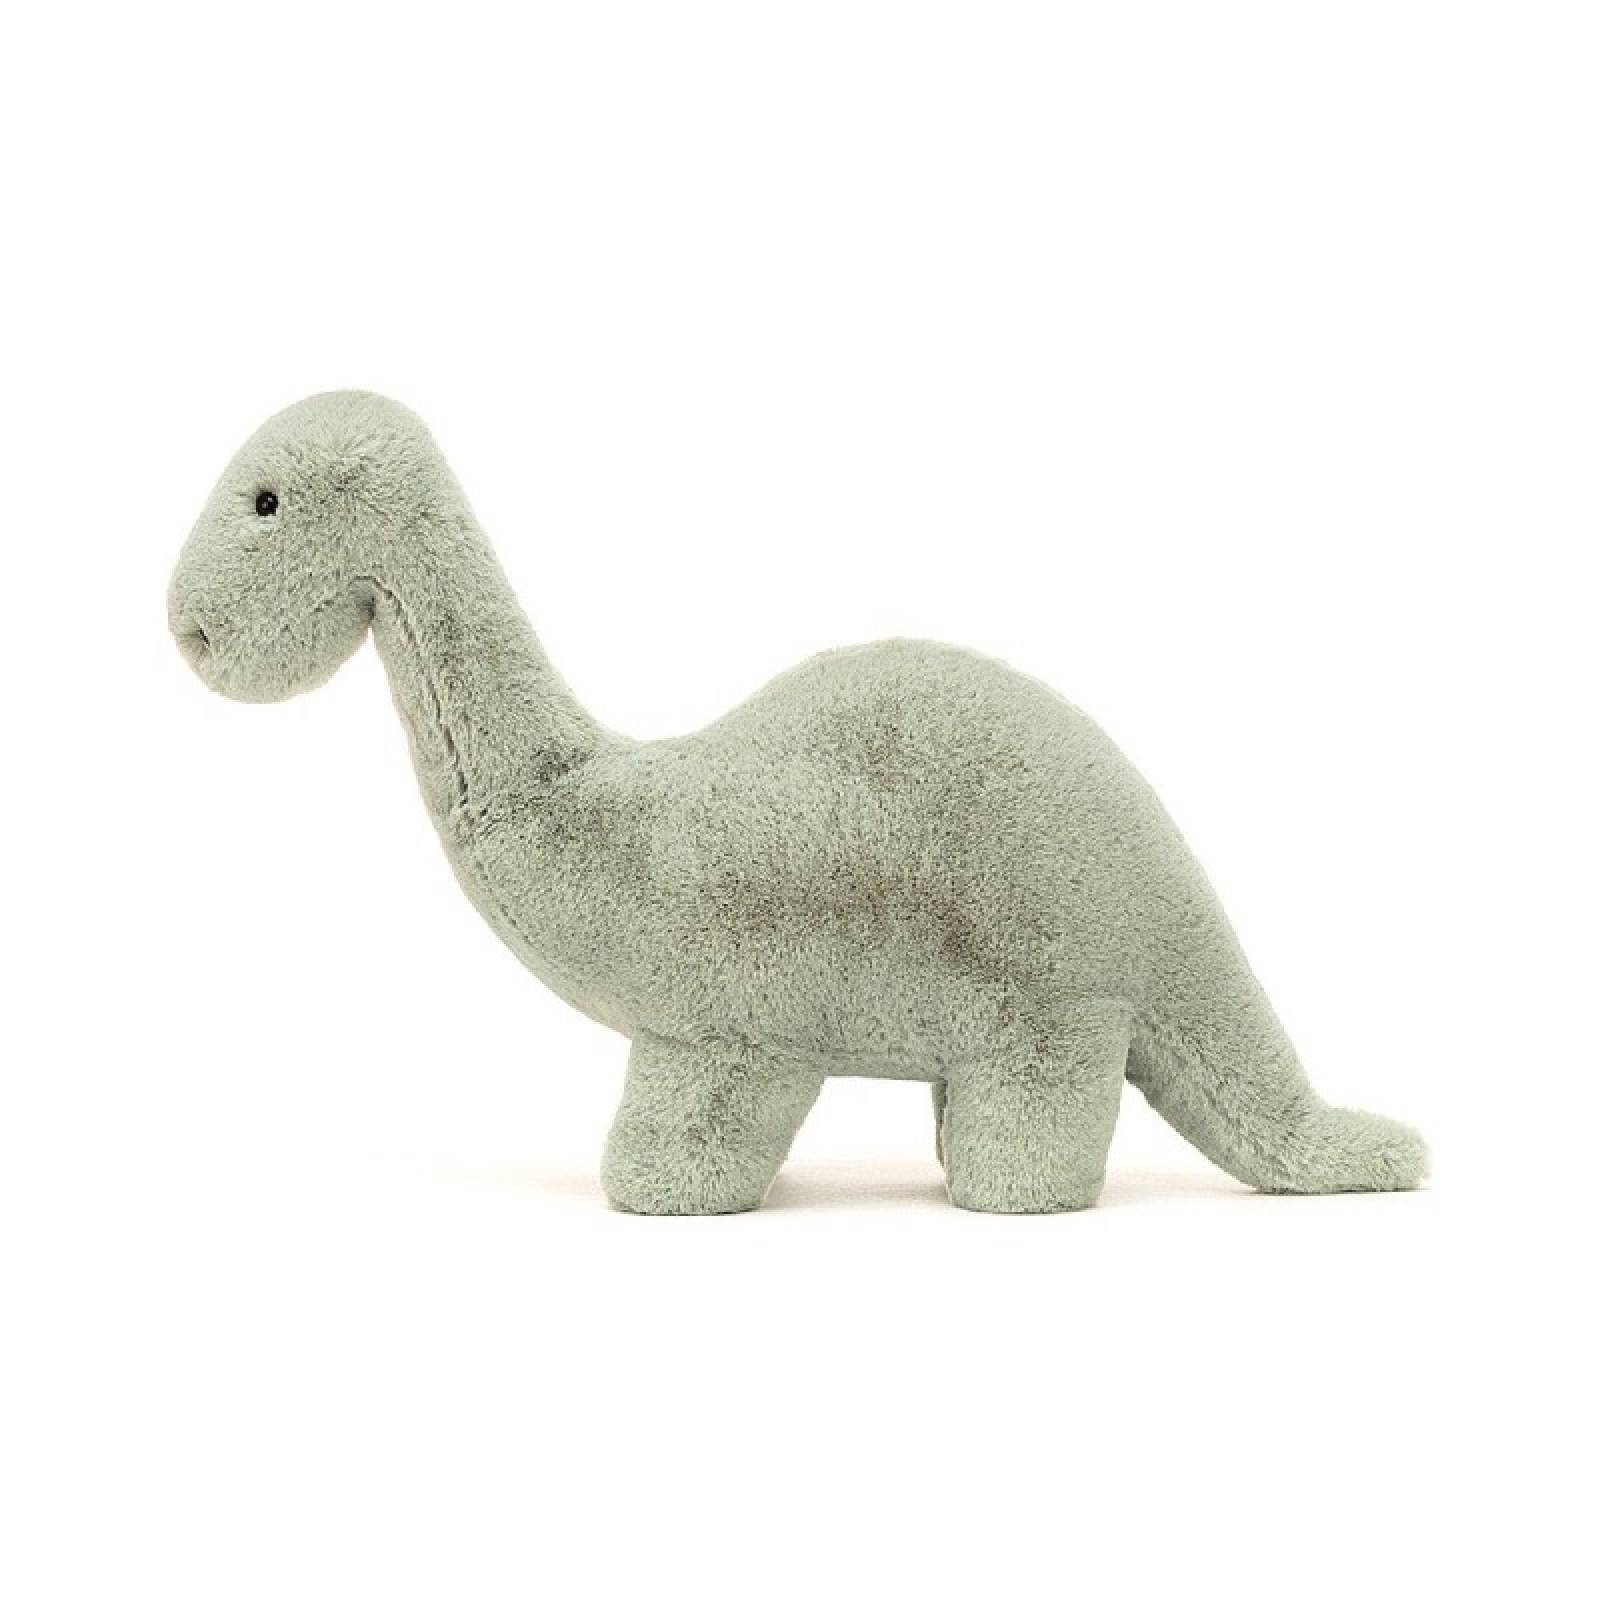 Fossilly Brontosaurus Dinosaur Soft Toy By Jellycat thumbnails